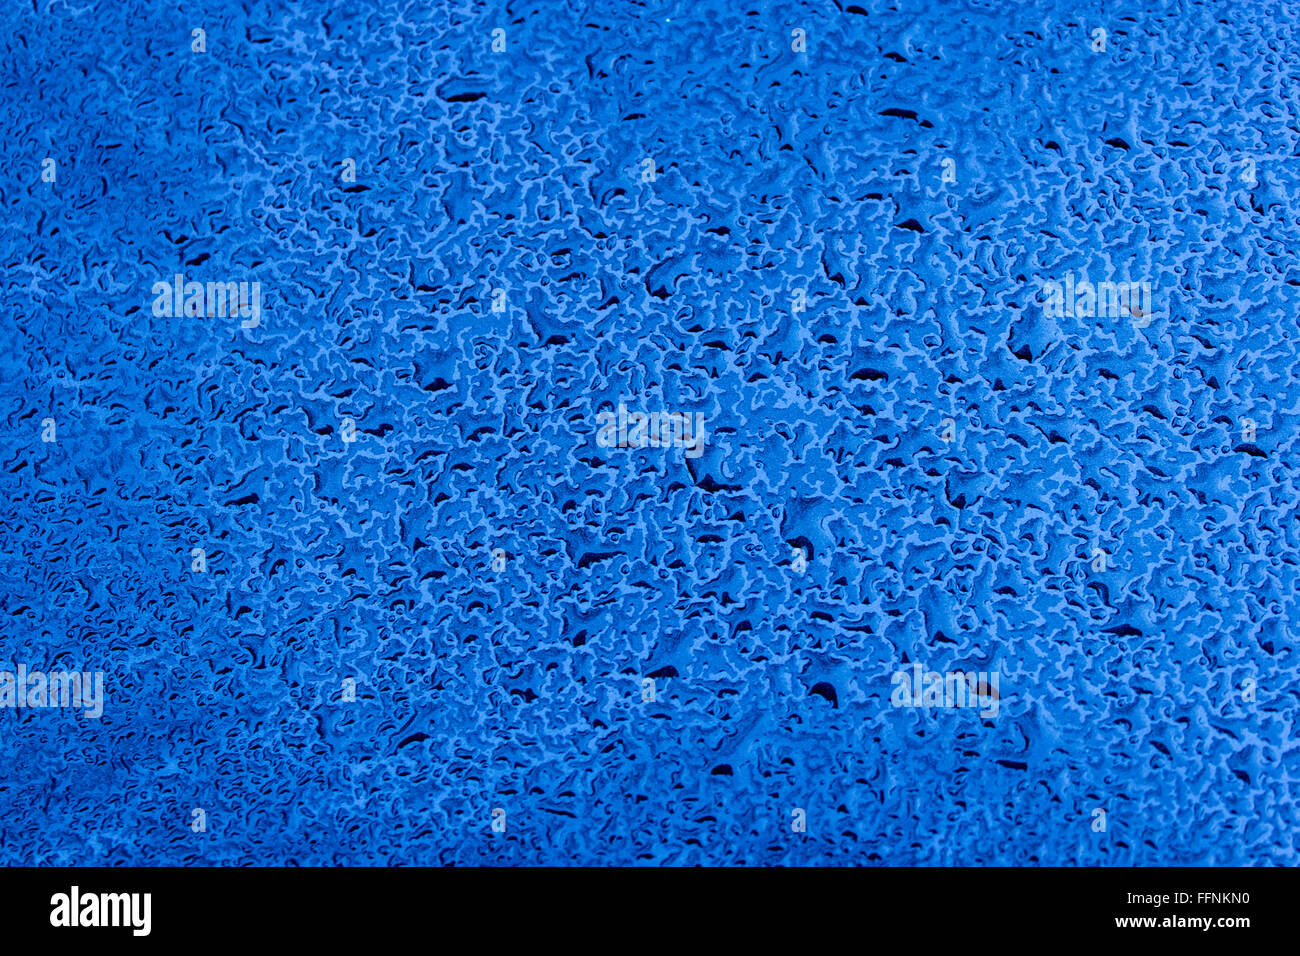 Waterdrops on blue car paint as background Stock Photo